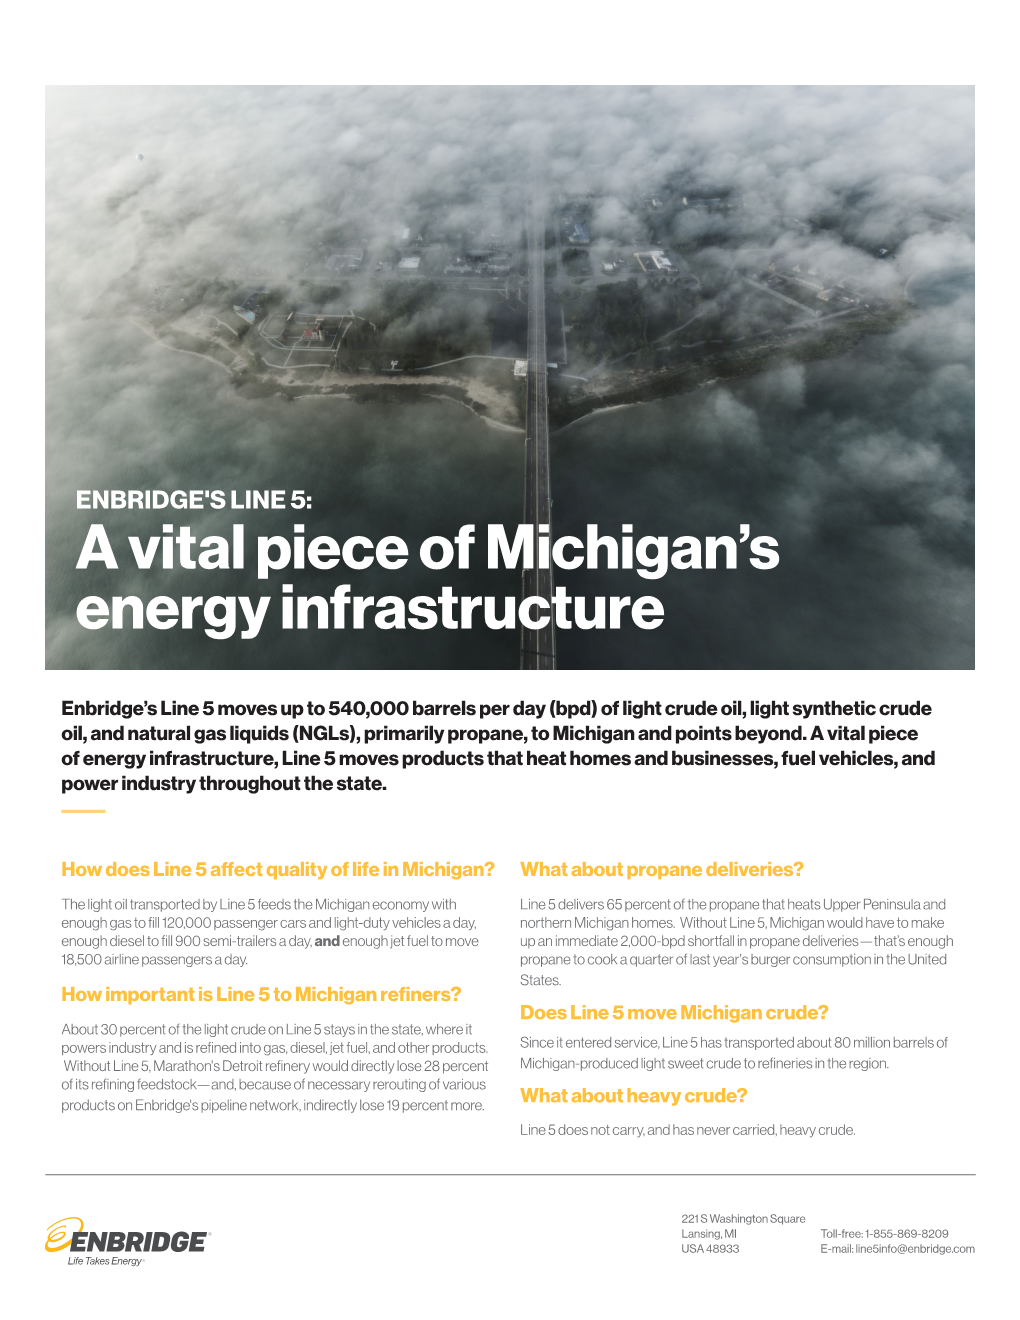 A Vital Piece of Michigan's Energy Infrastructure